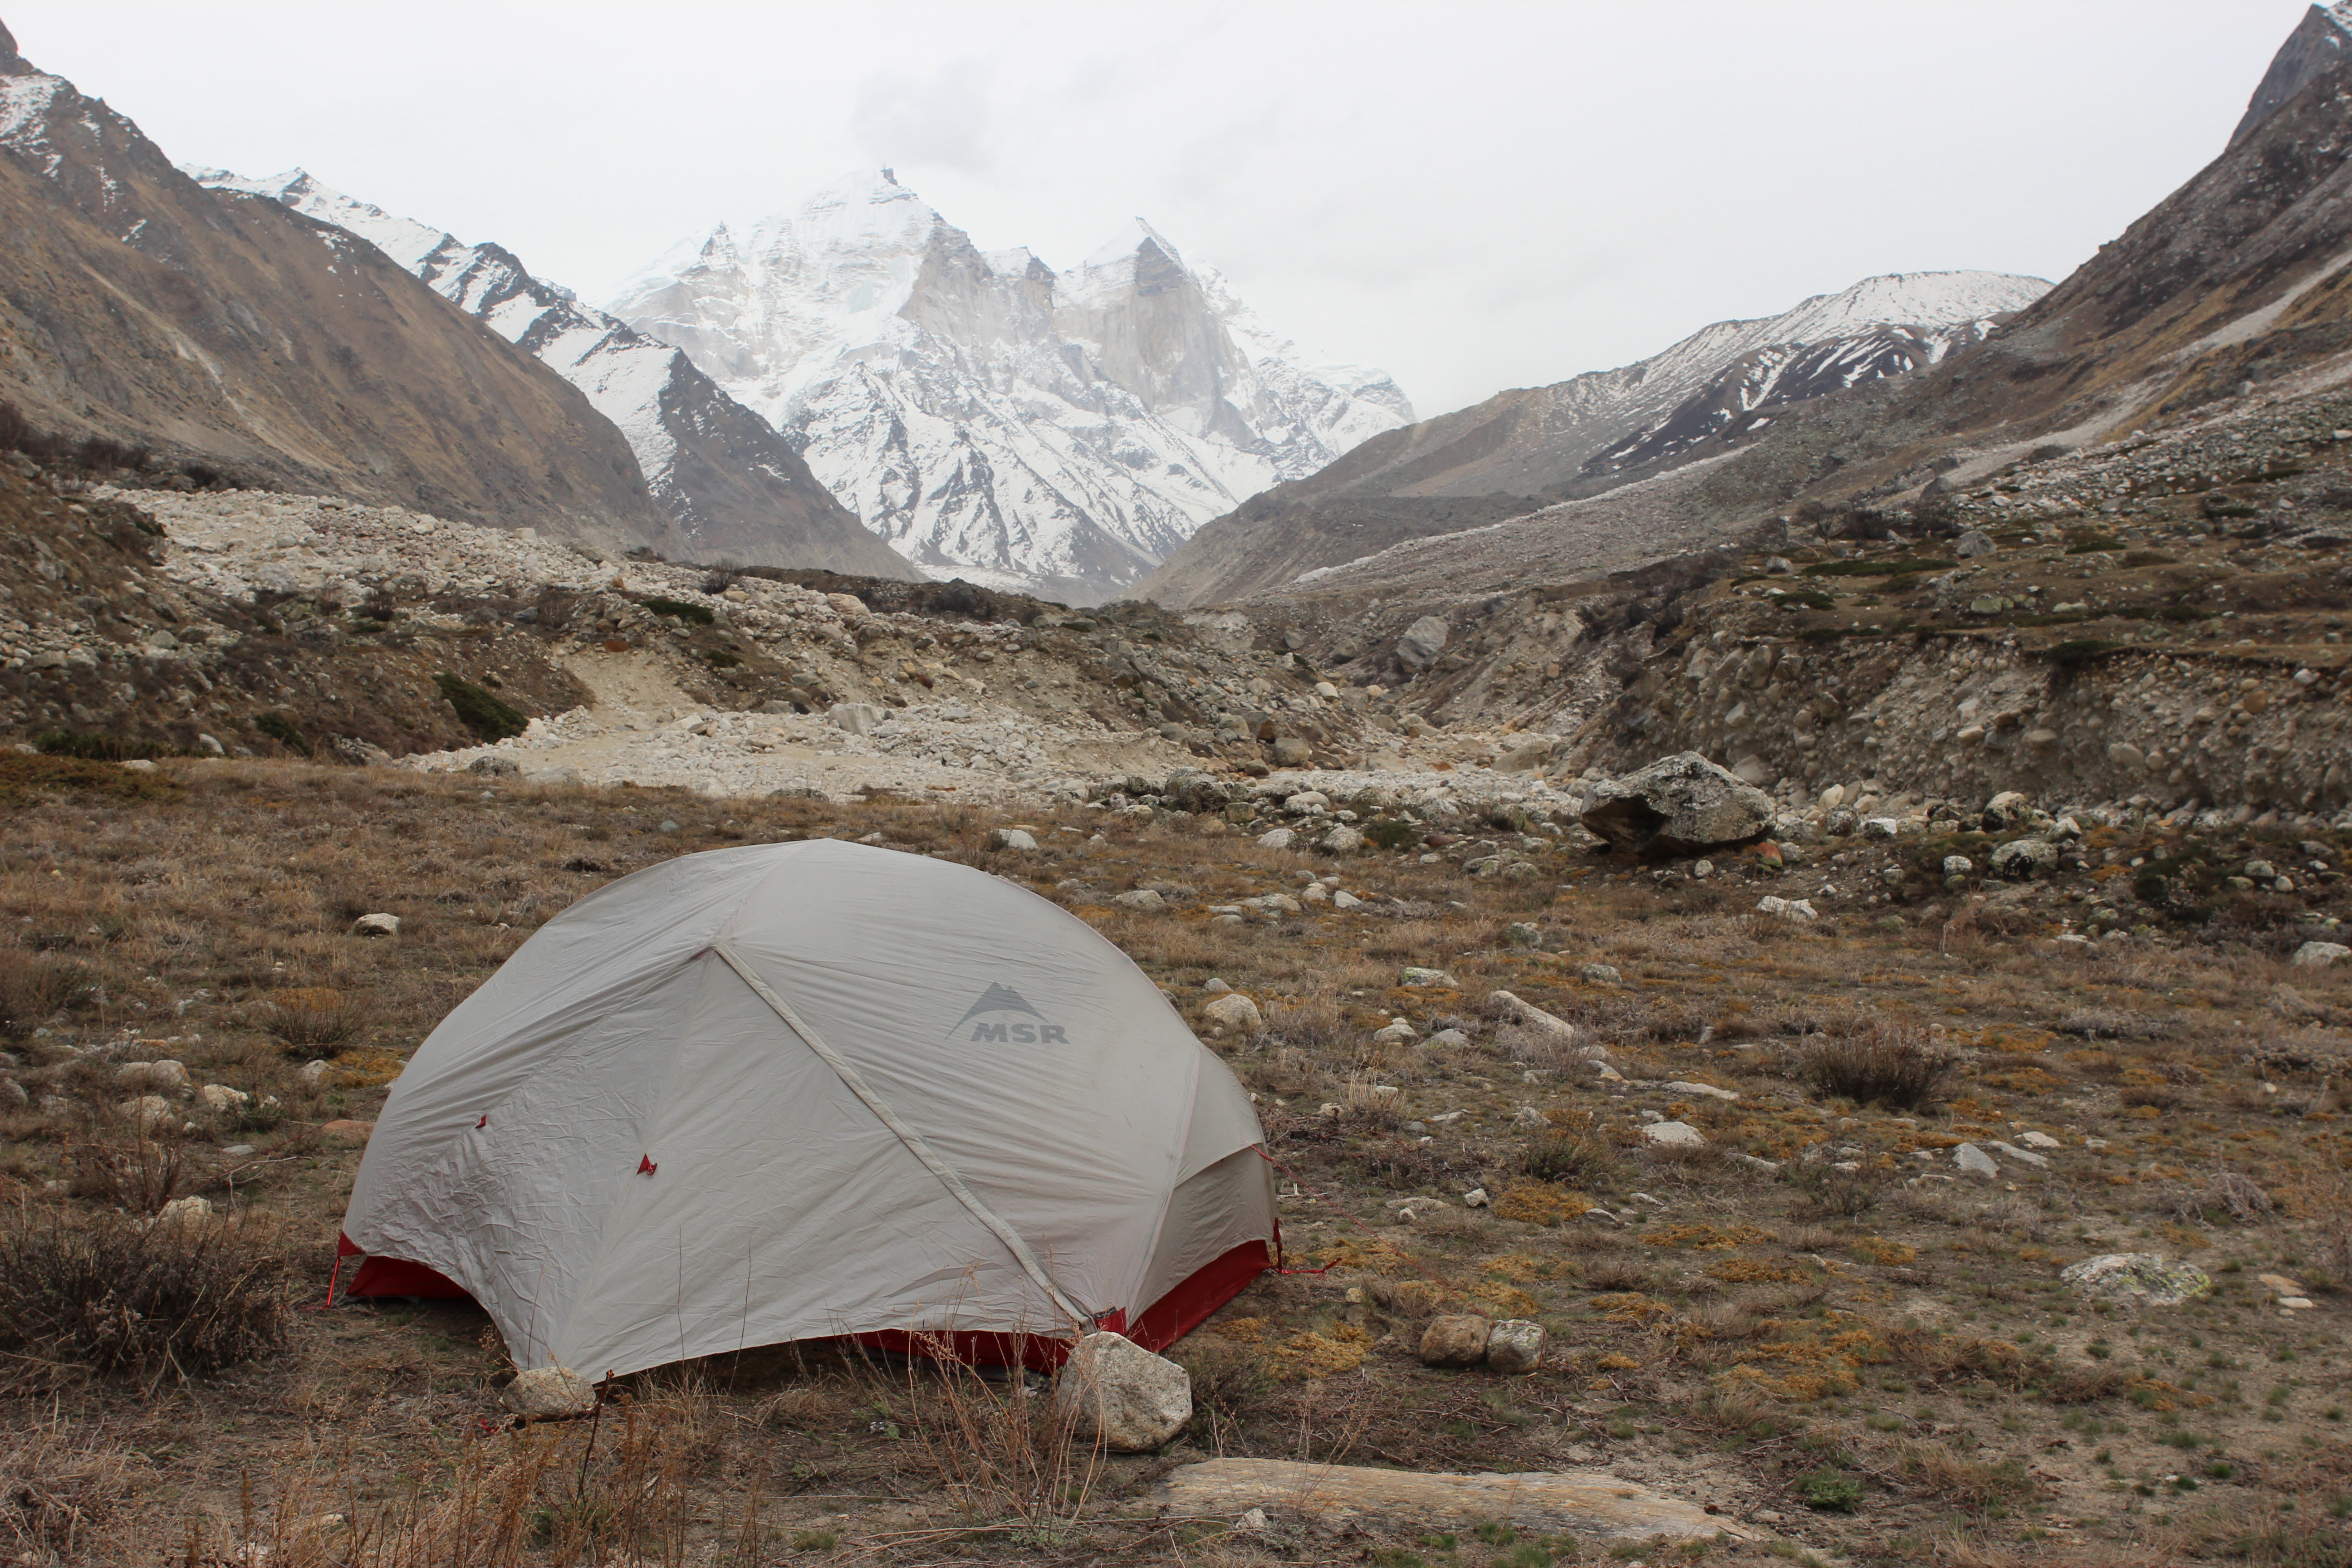 Our campsite with Parbat I:II behind. Photo: Trixie Pacis